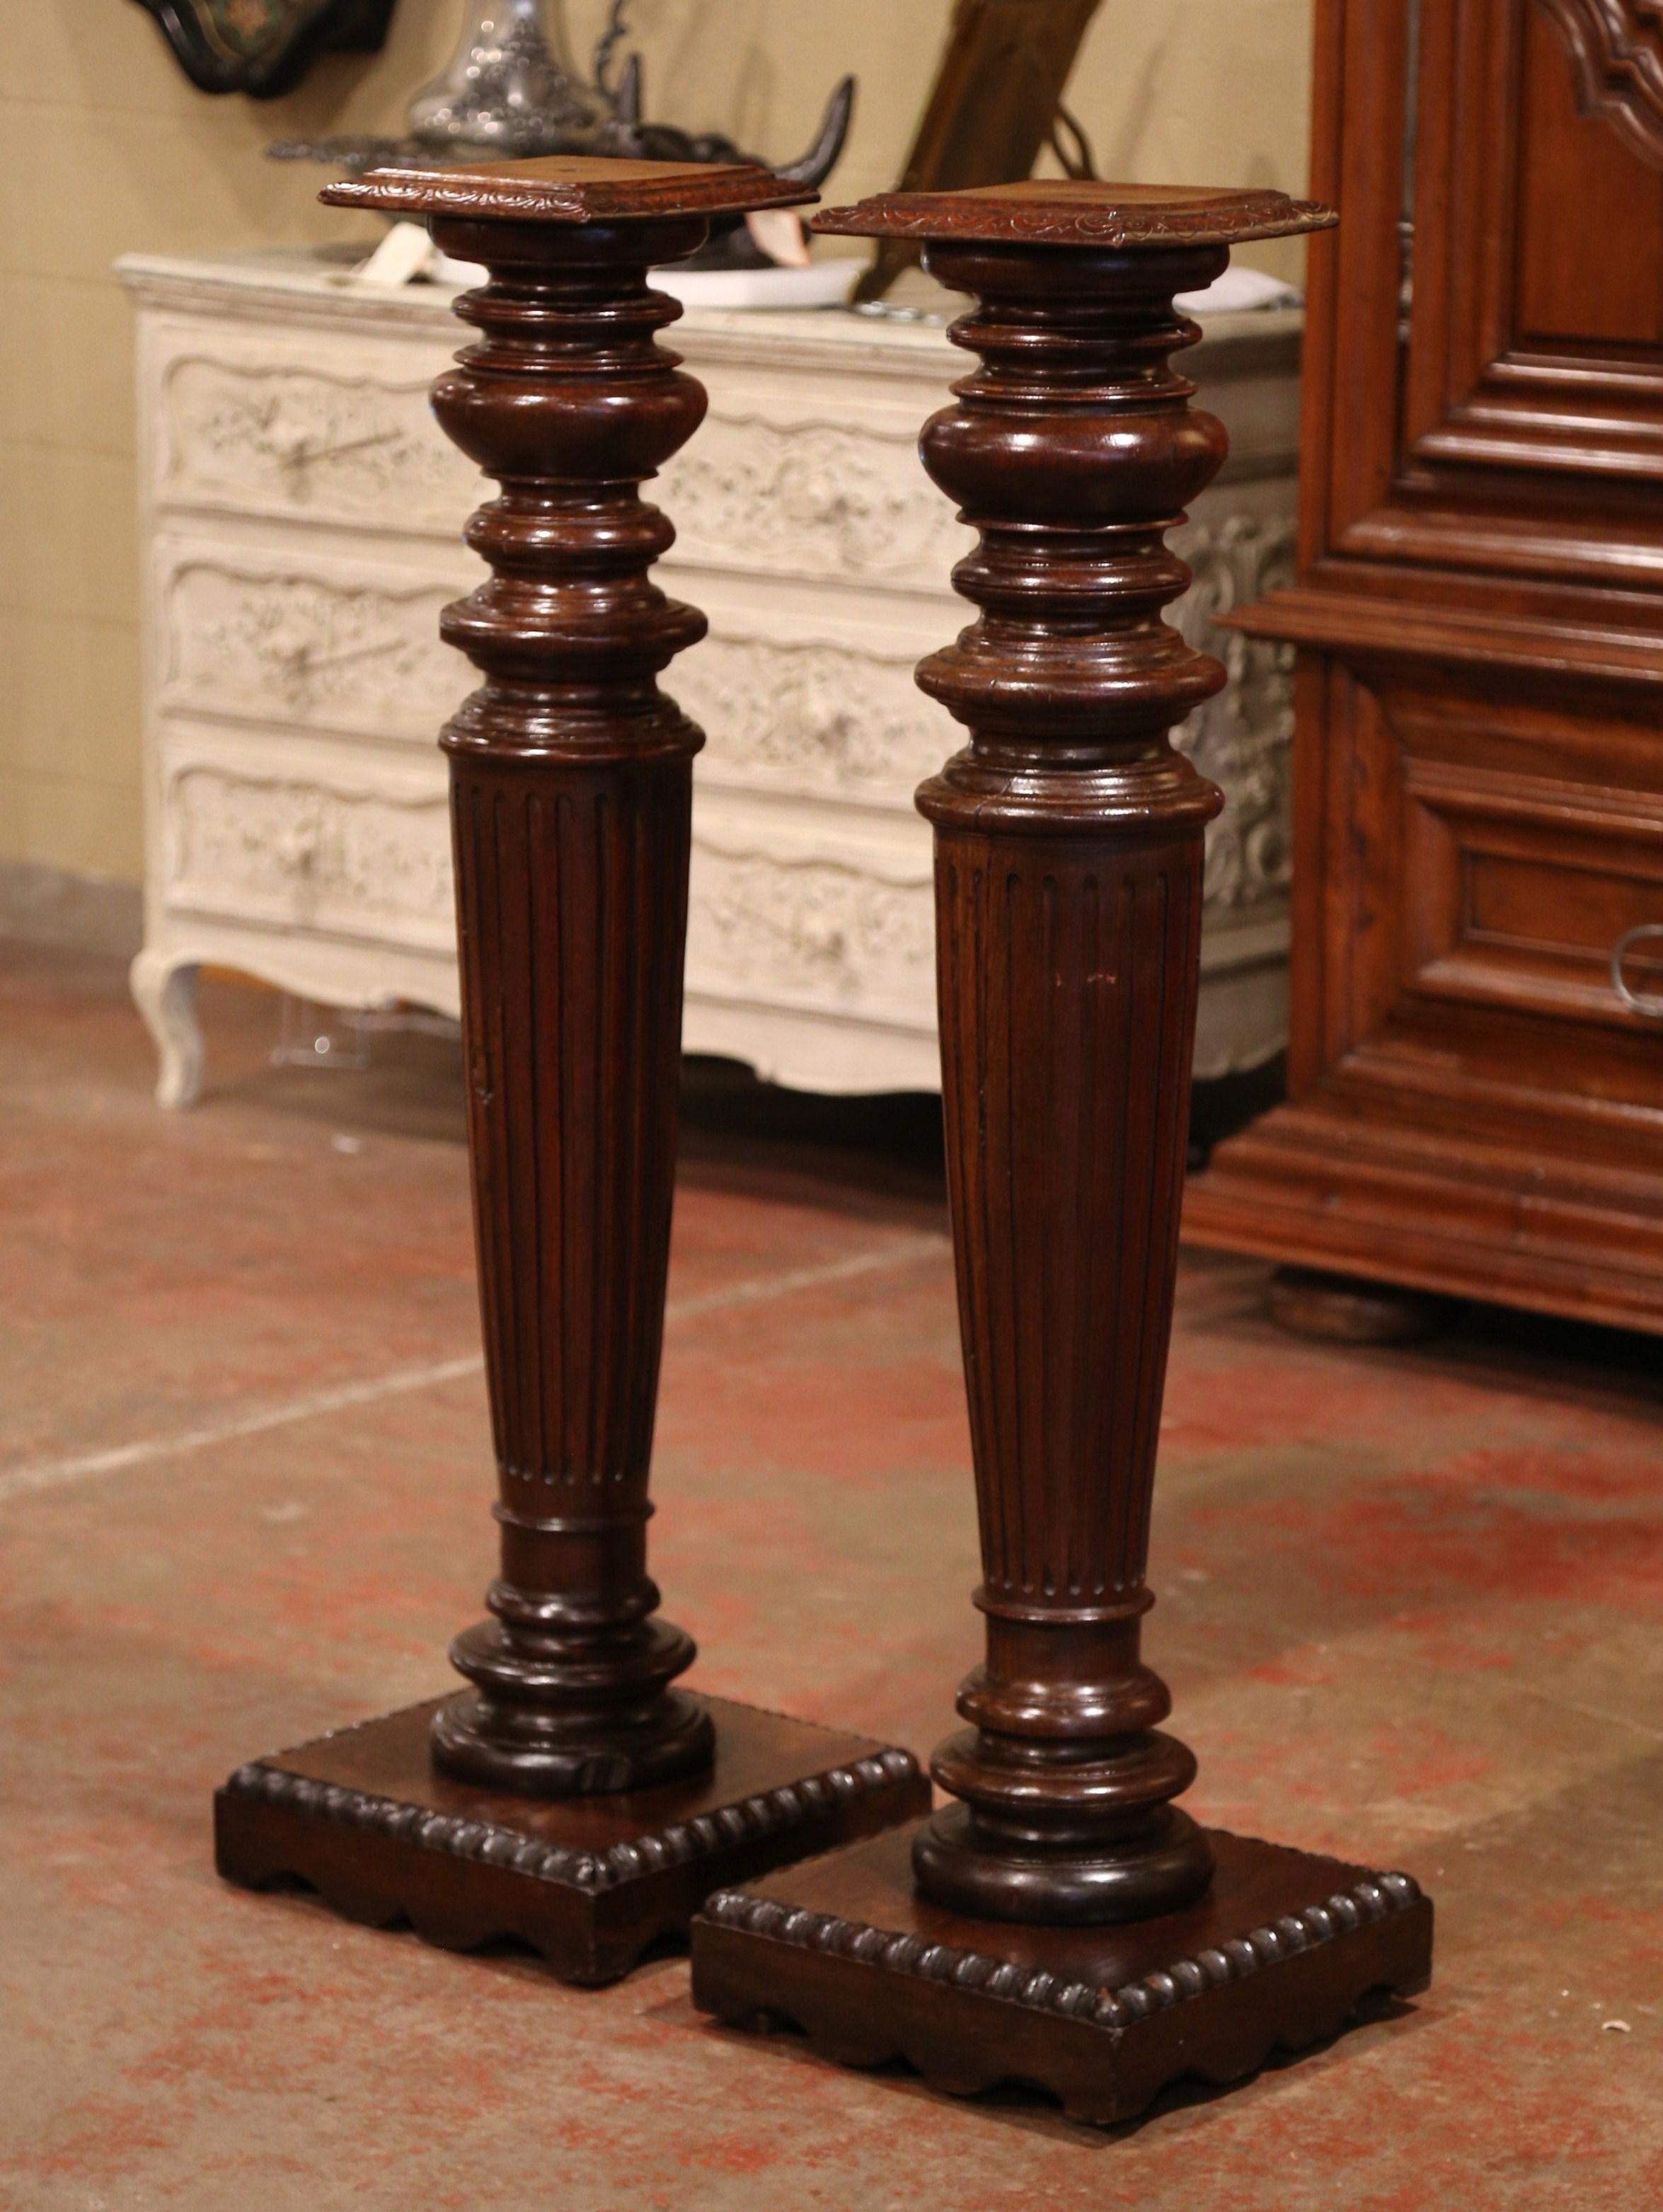 These elegant antique pedestals were crafted in Normandy, northern France, circa 1870. Standing on a wide square plinth base, each tall oak column has a long tapered and turned stem and features a square swivel top surface decorated with carved